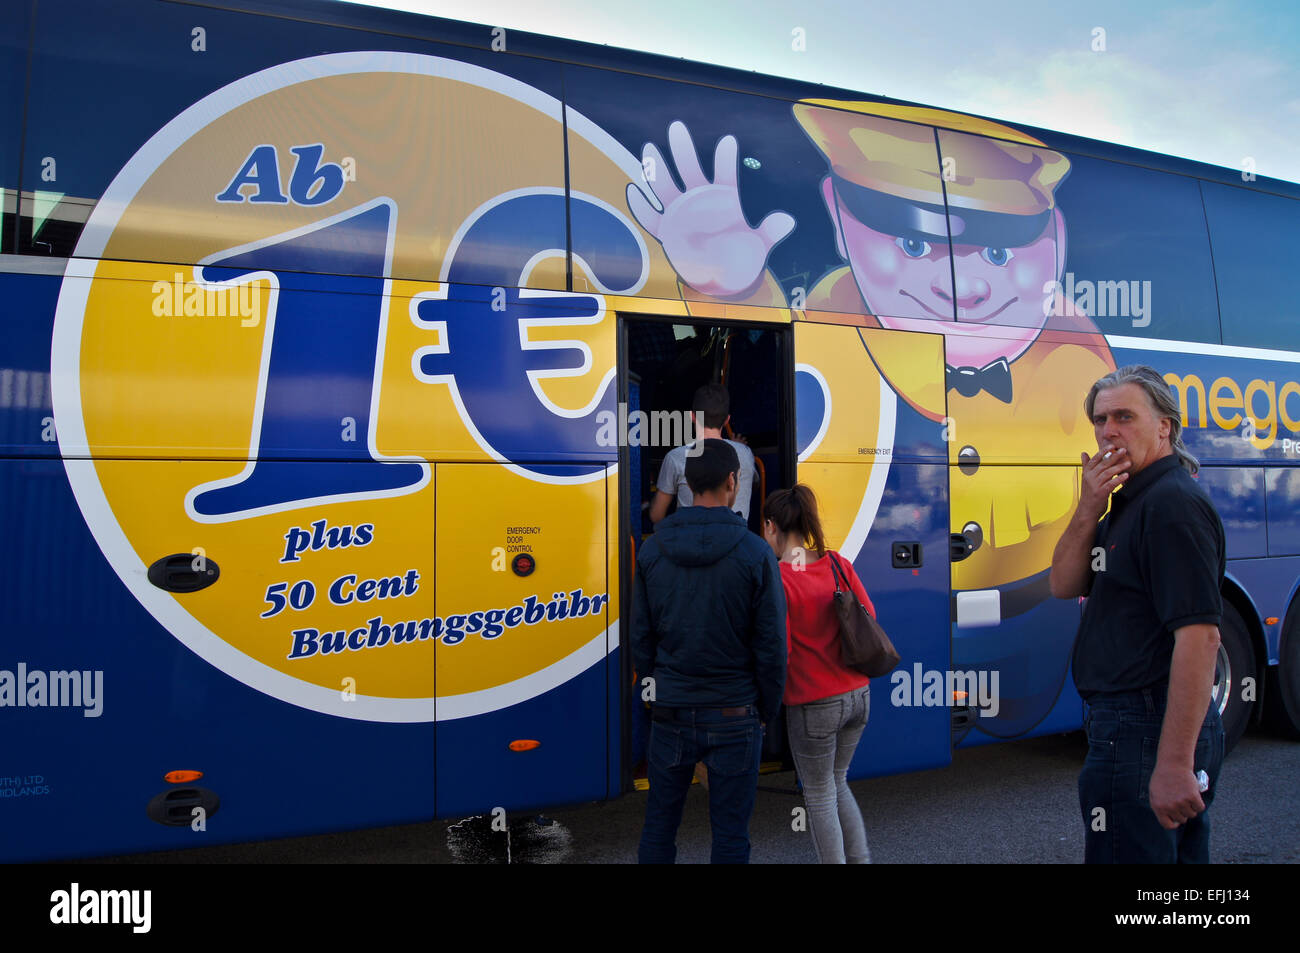 Posters advertising €1 fares on a Megabus coach at Boulogne-sur mer, France Stock Photo